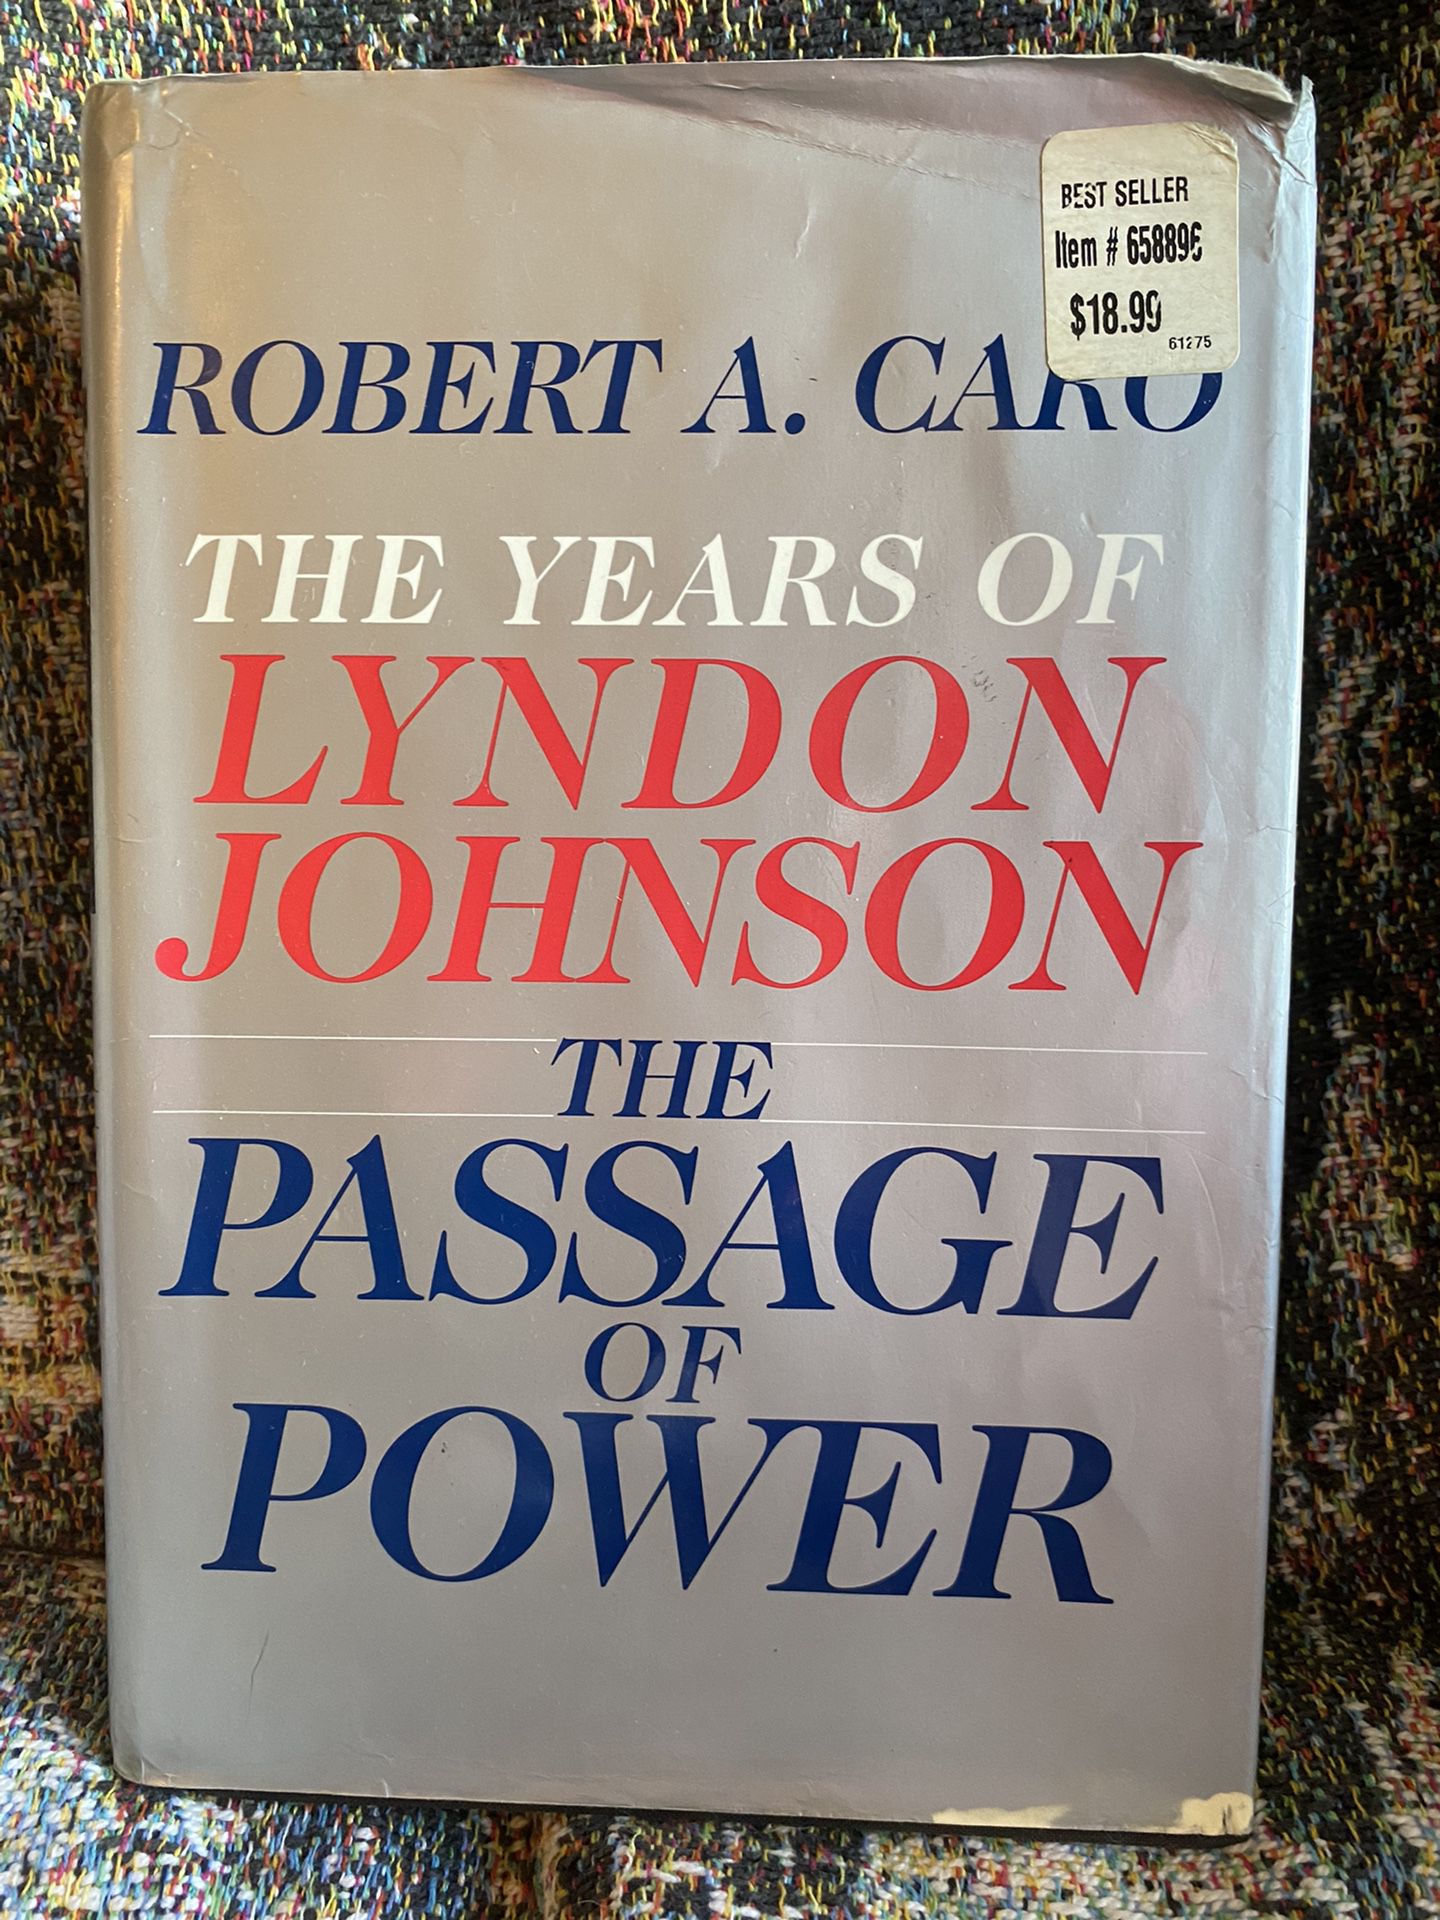 The Years of Lyndon Johnson ...The Passage of Power